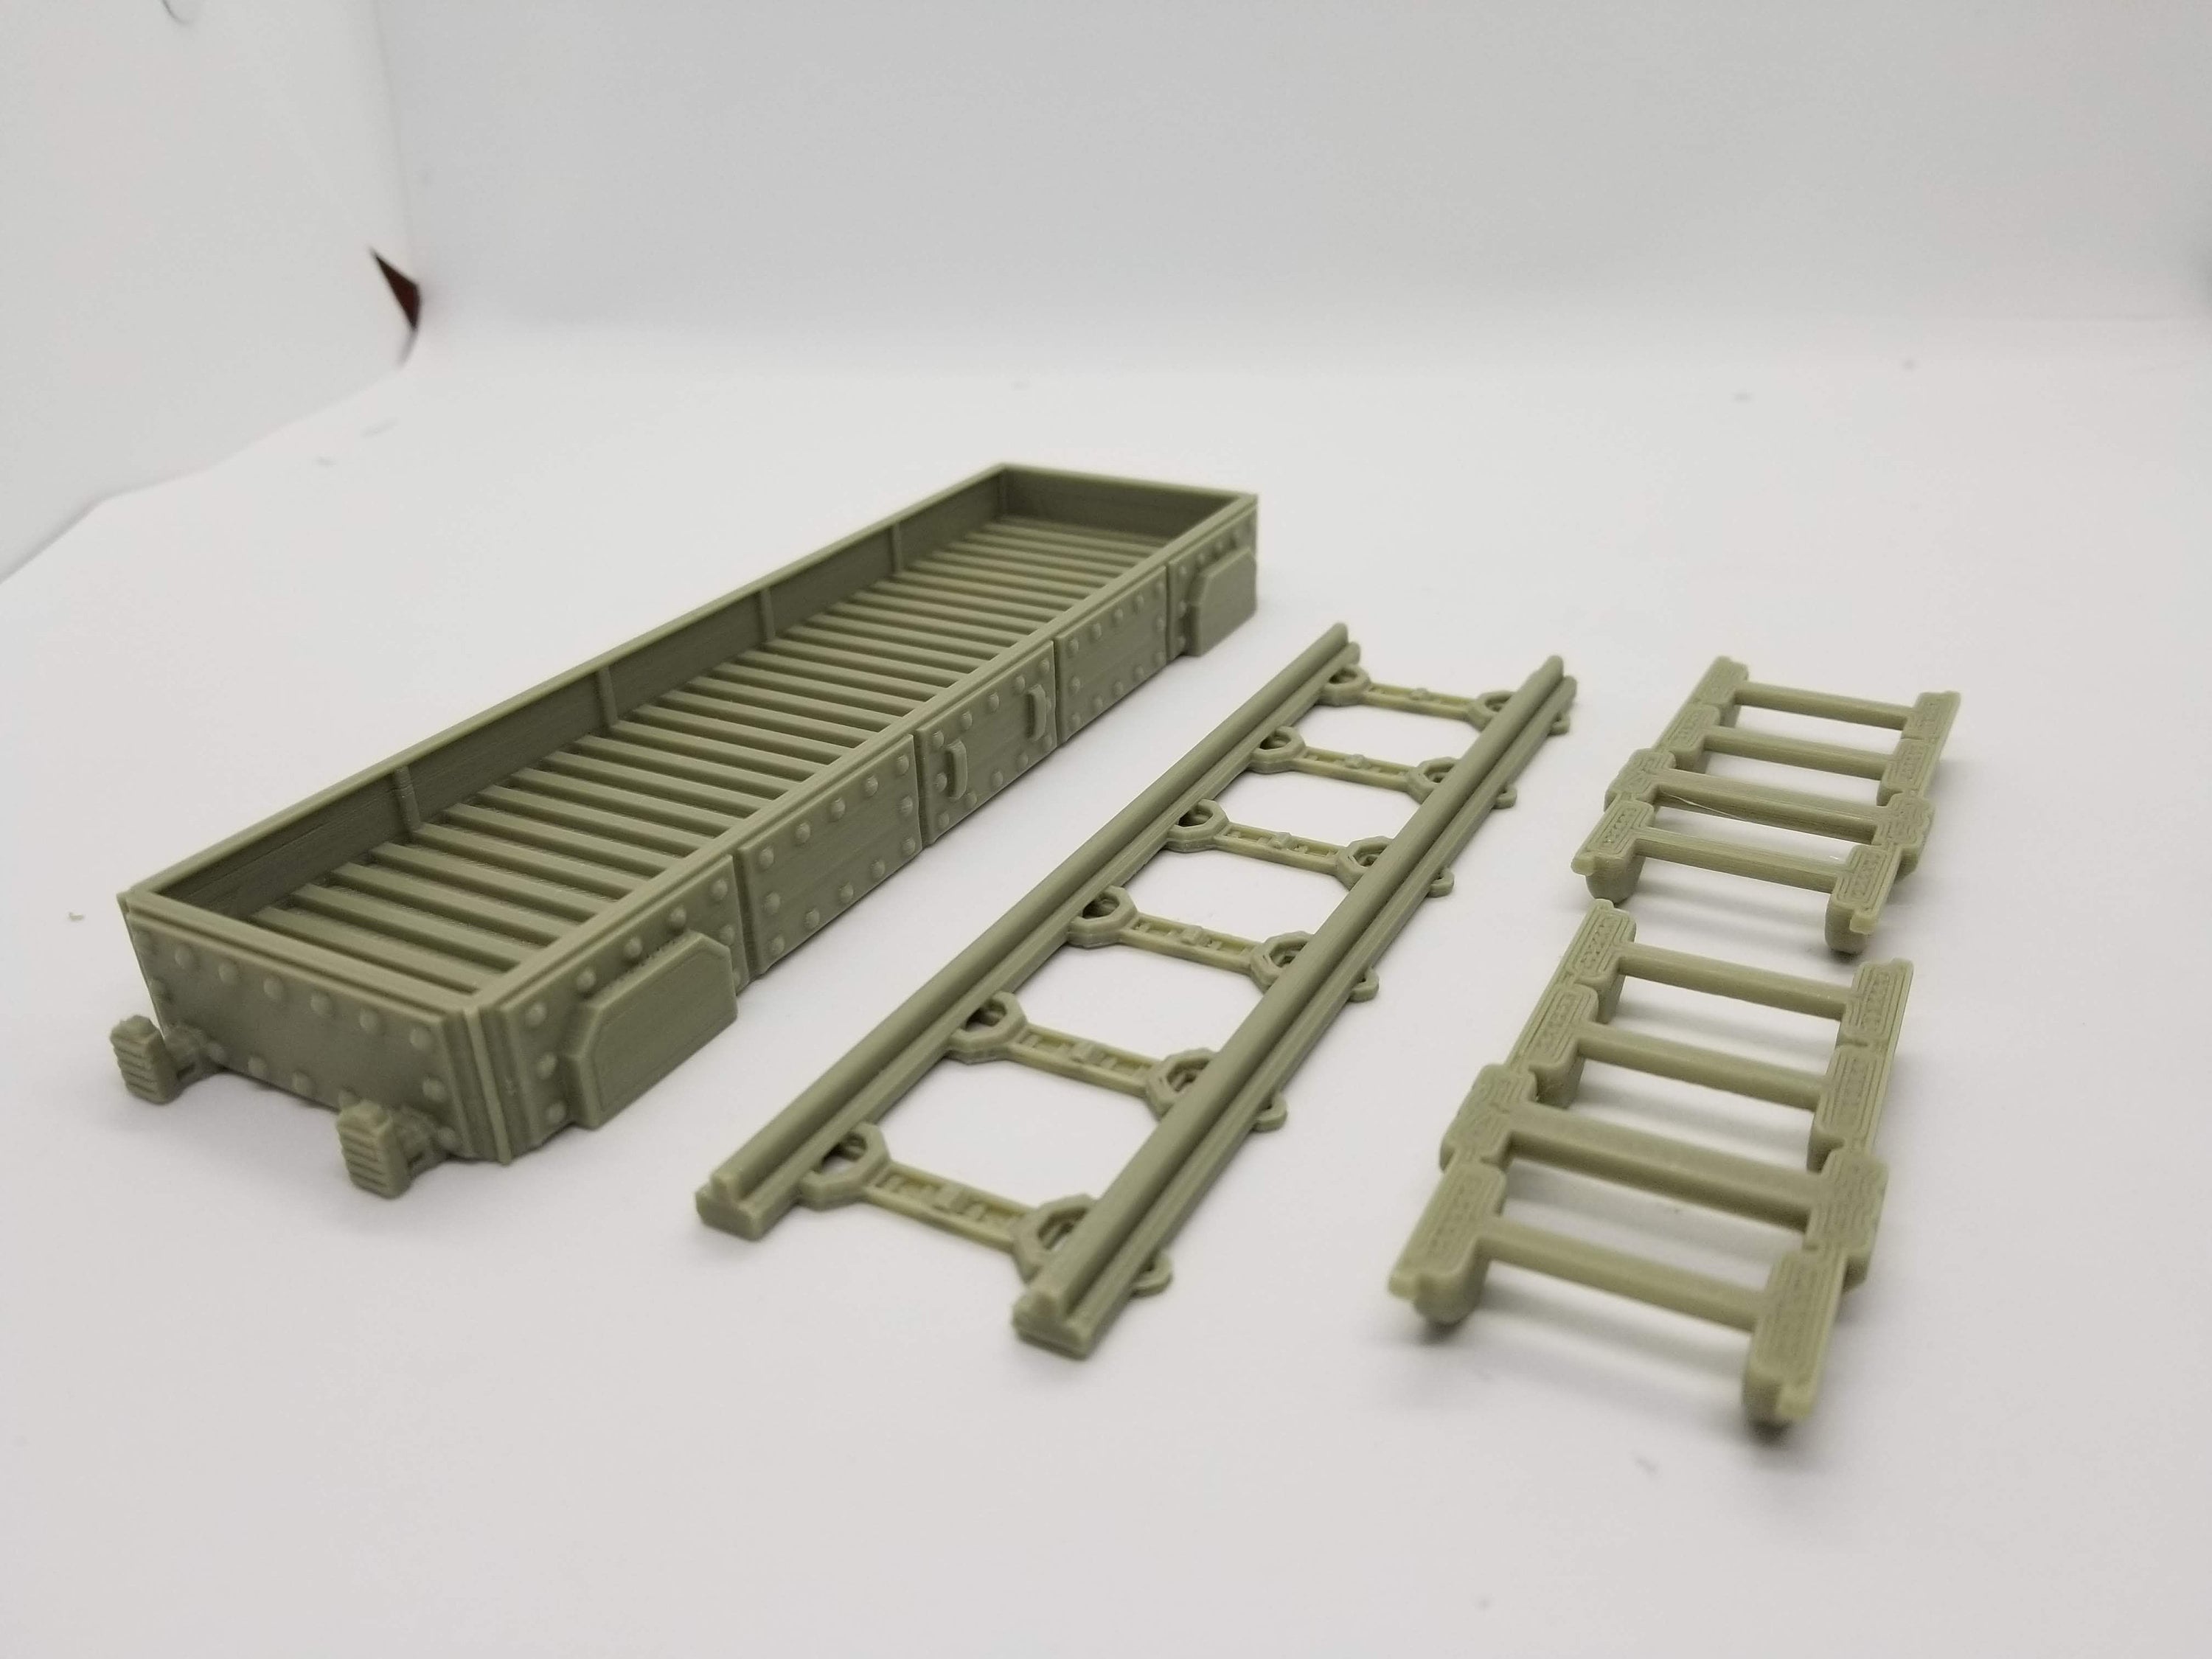 Sci-Fi Train Empty Bed Car Add-On/ 28mm Wargaming Terrain / Warlayer /Print to Order / 3d Printed/Licensed Printer